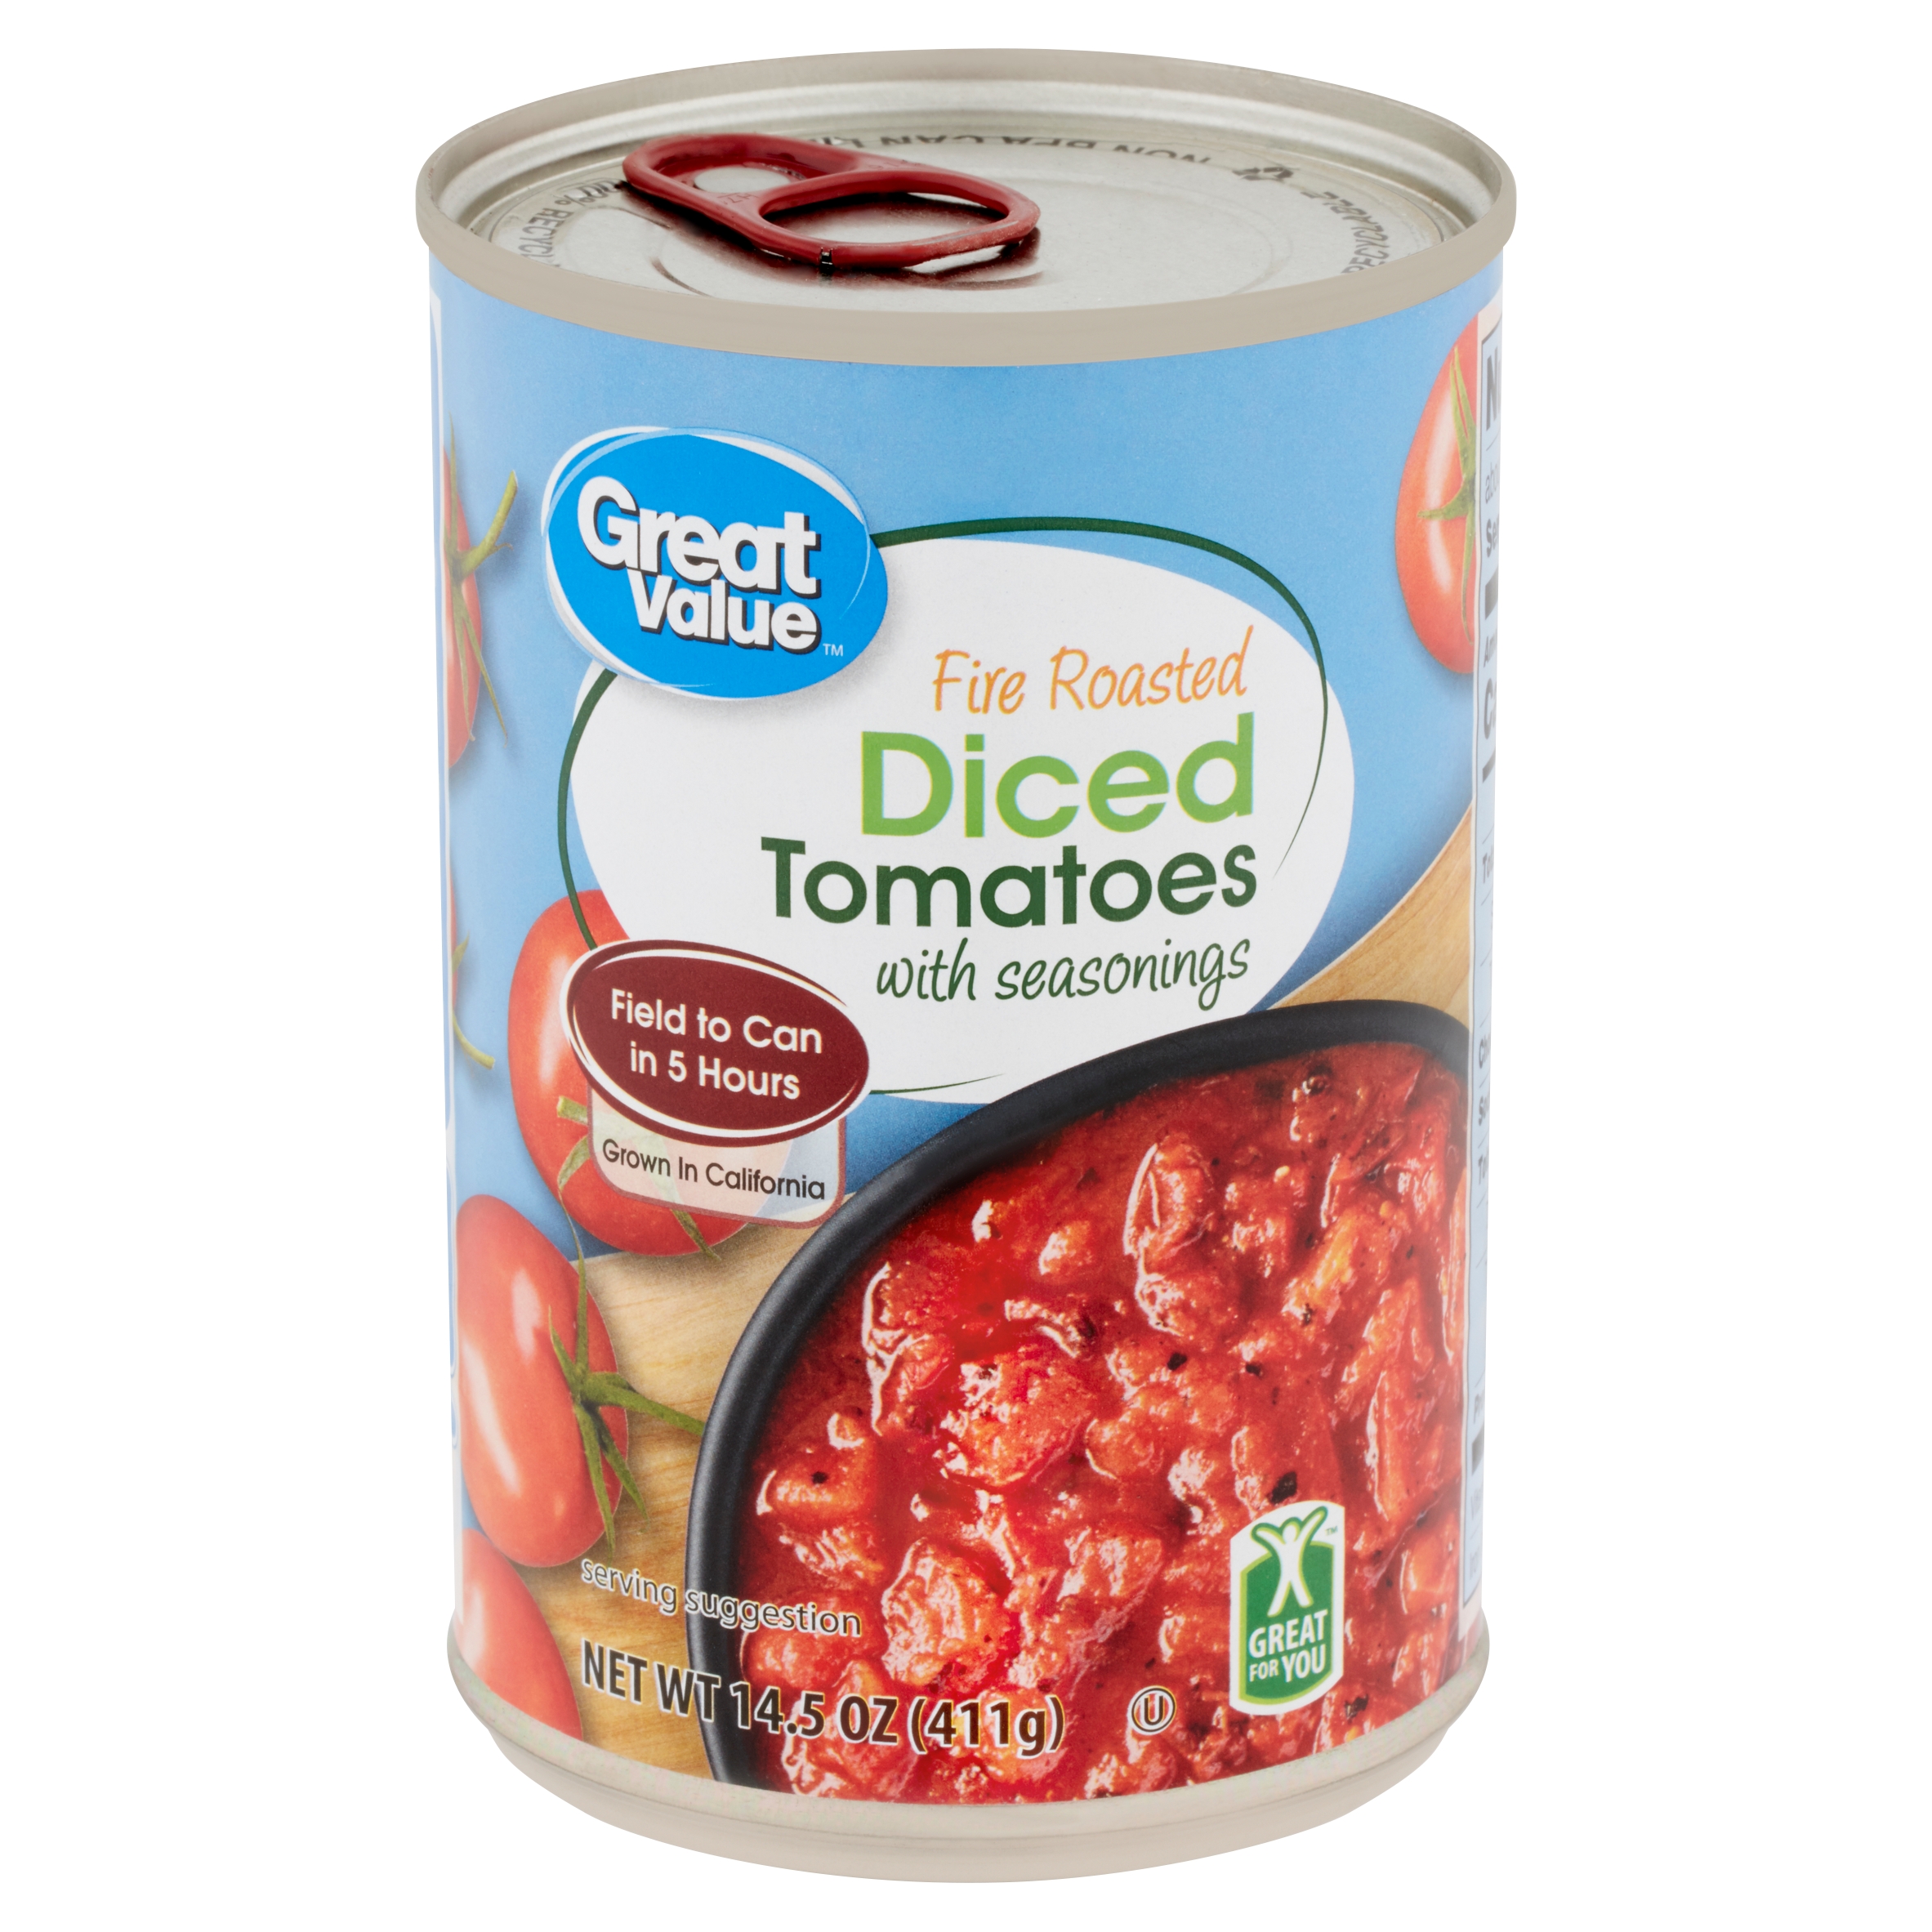 (6 Pack) Great Value Fire Roasted Diced Tomatoes with Seasonings, 14.5 Oz